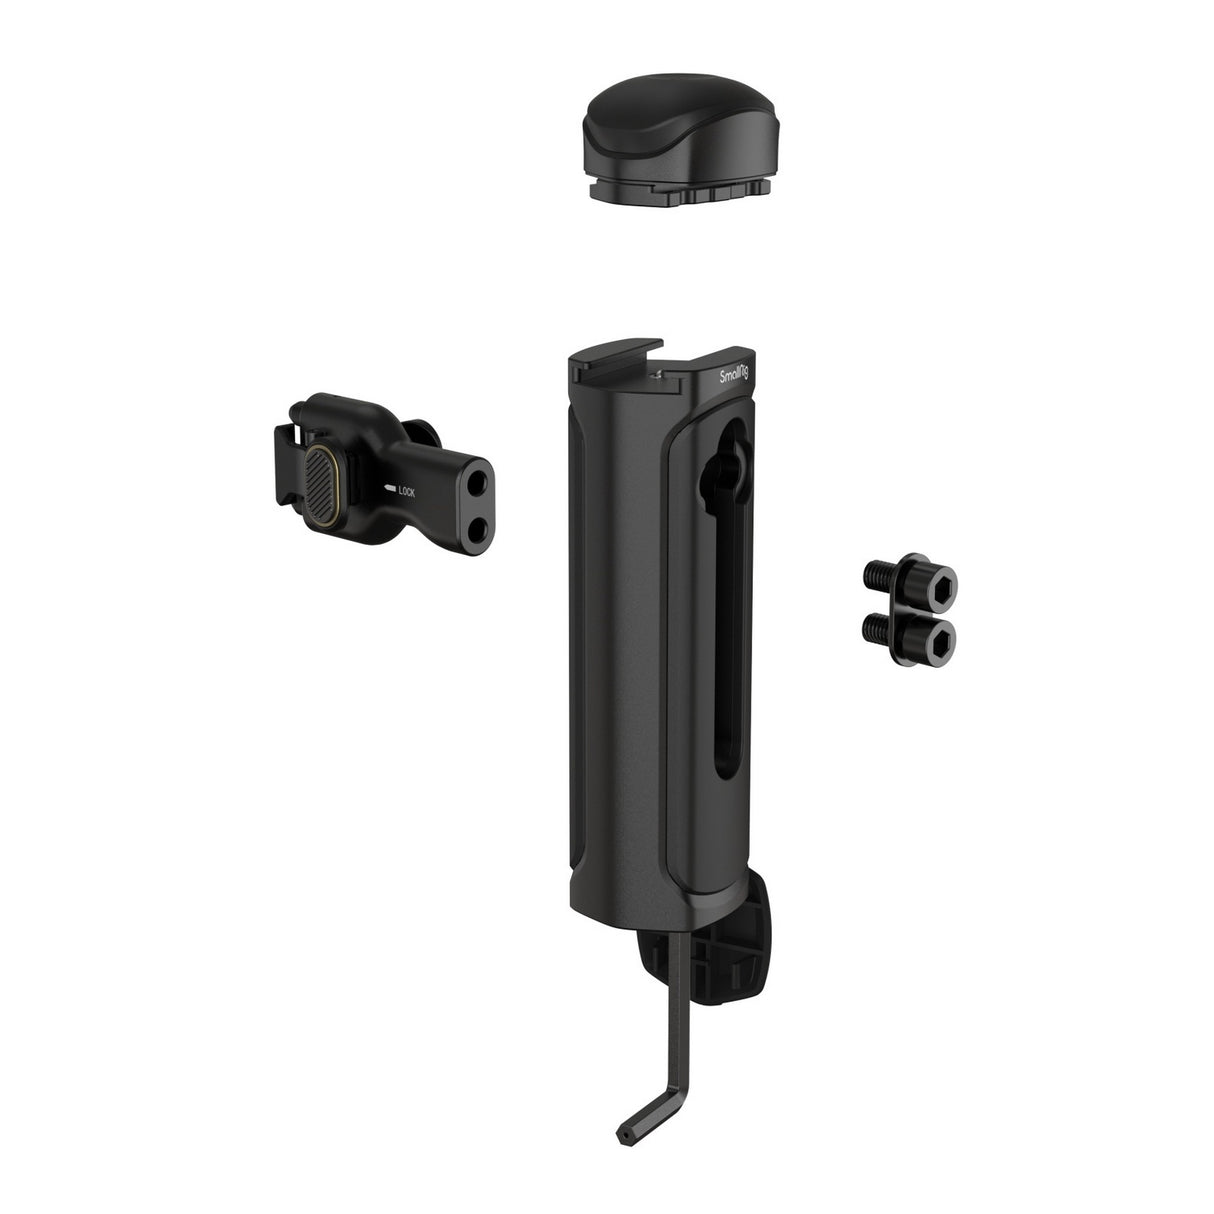 SmallRig Wireless Control and Quick Release Side Handle for Smartphones